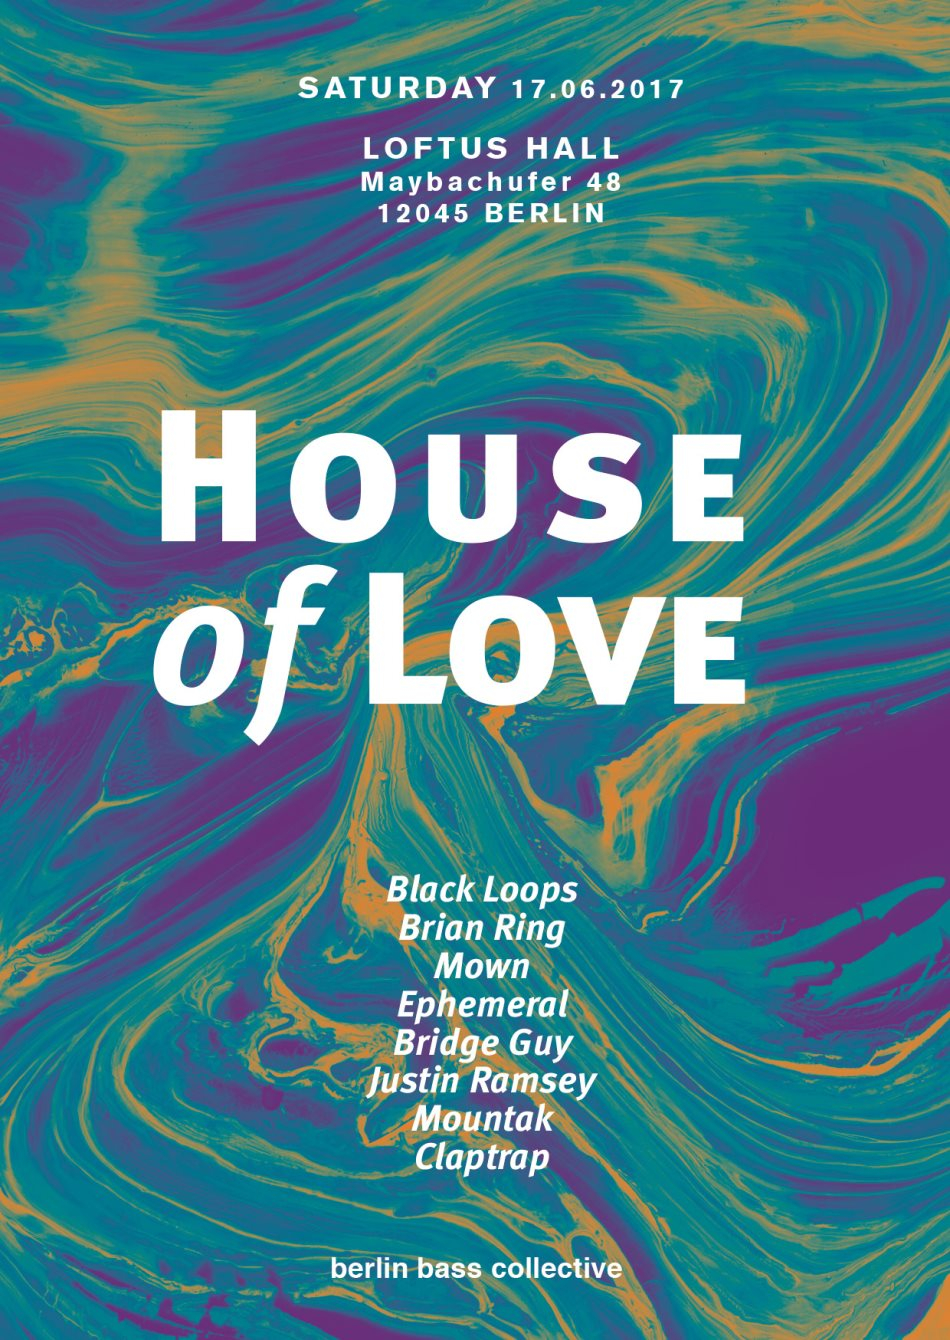 House of Love - Flyer front